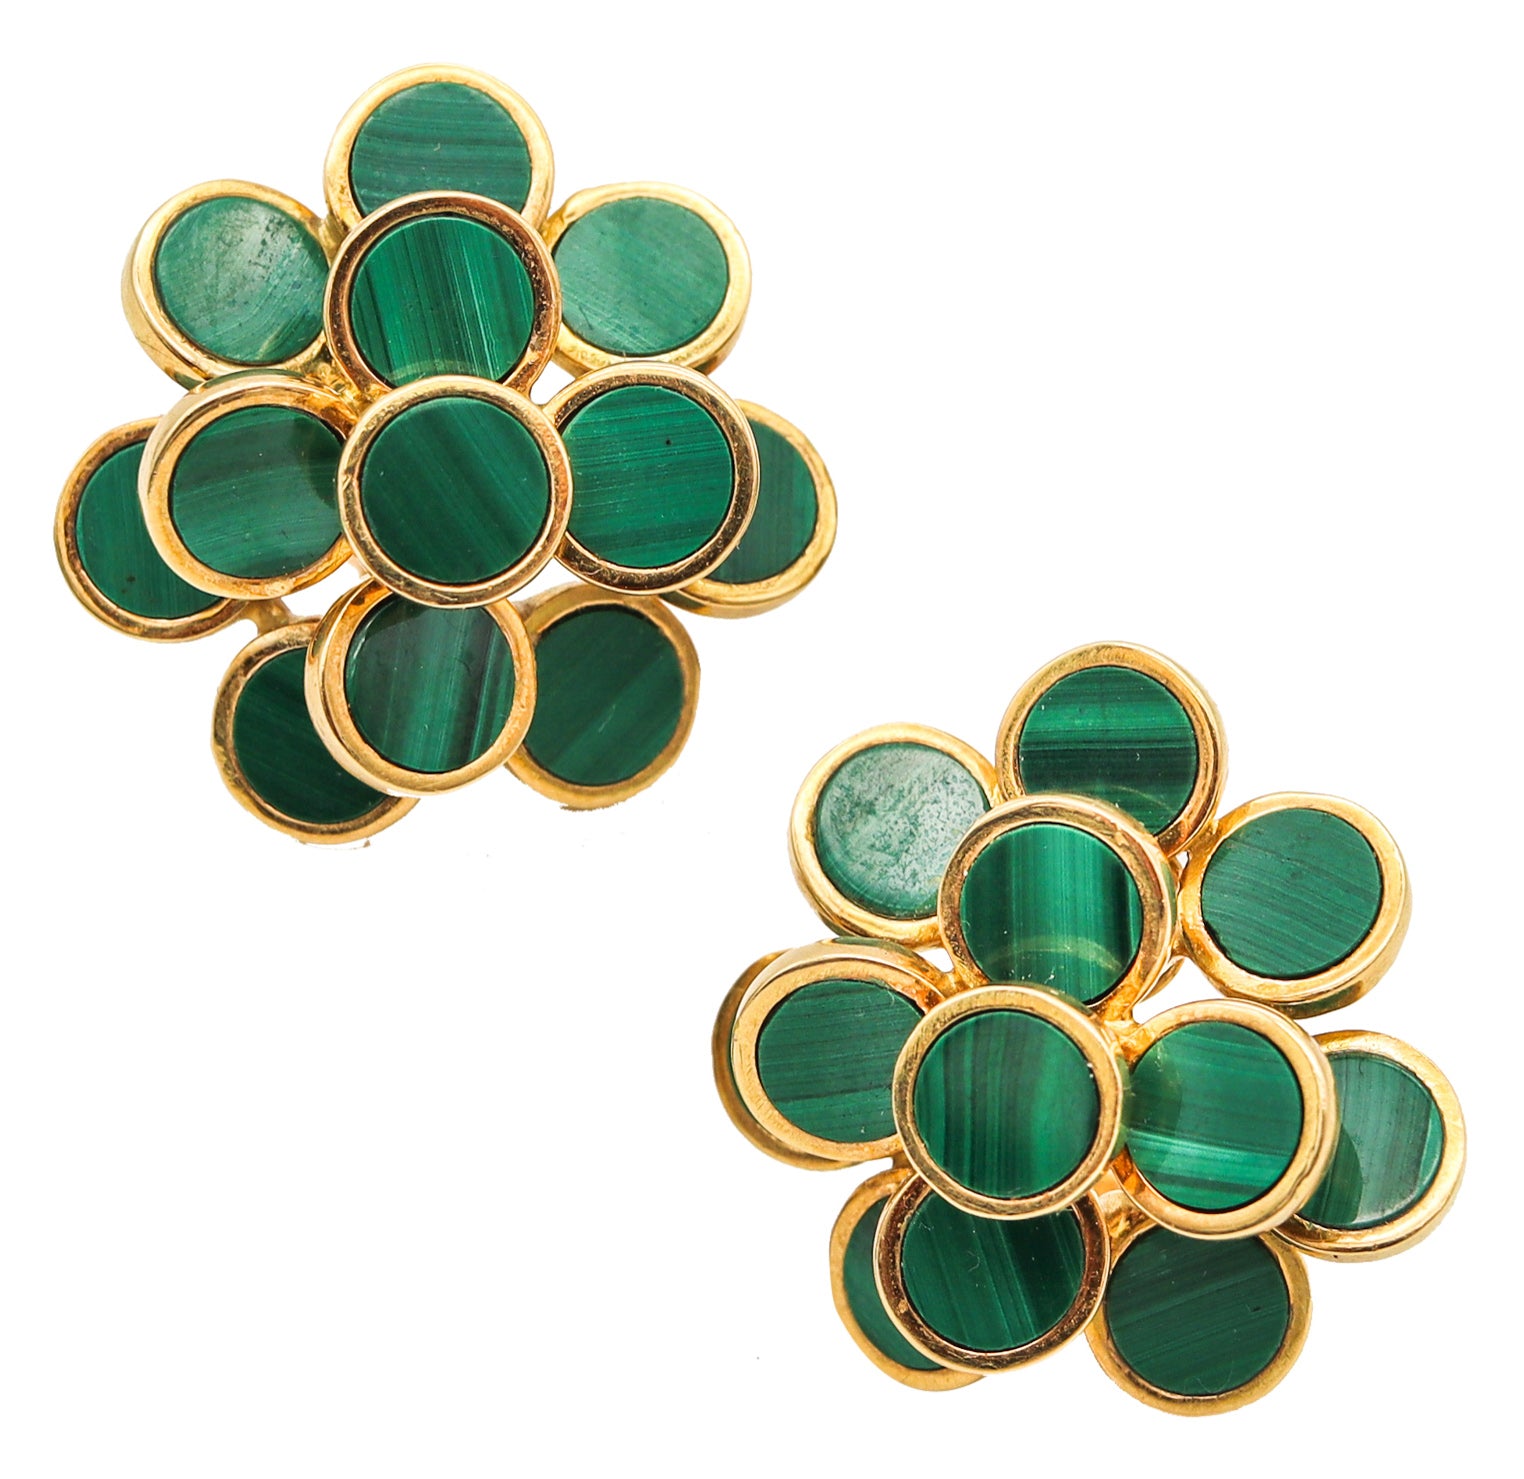 Chaumet Paris 1970 by Édouard Richard Retro Modernist Clips Earrings In 18Kt Gold With Malachite